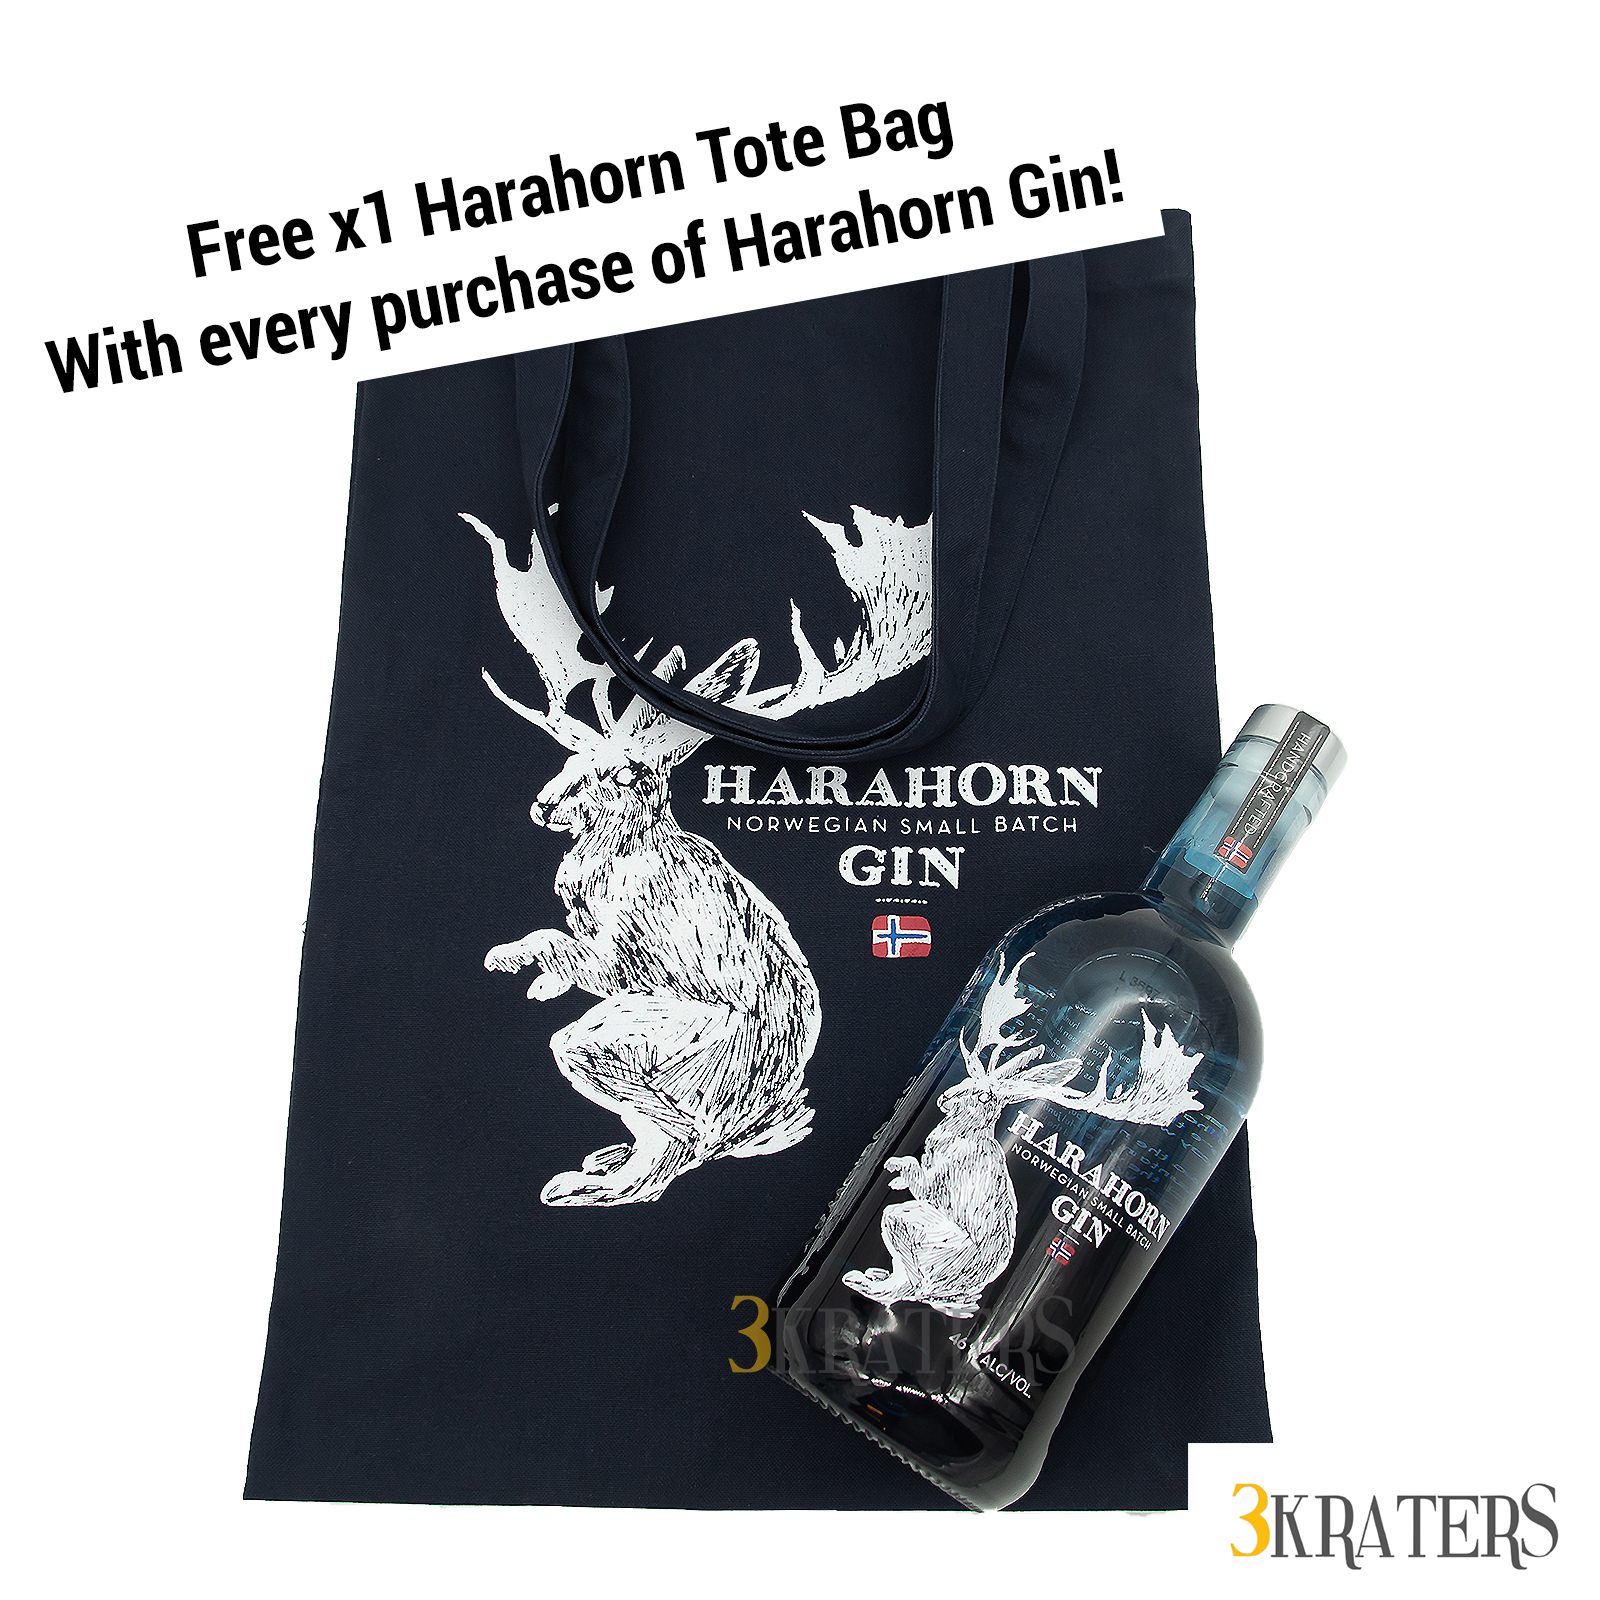 Harahorn Norwegian Small Batch Botanical Gin 750ml with limited edition tote bag